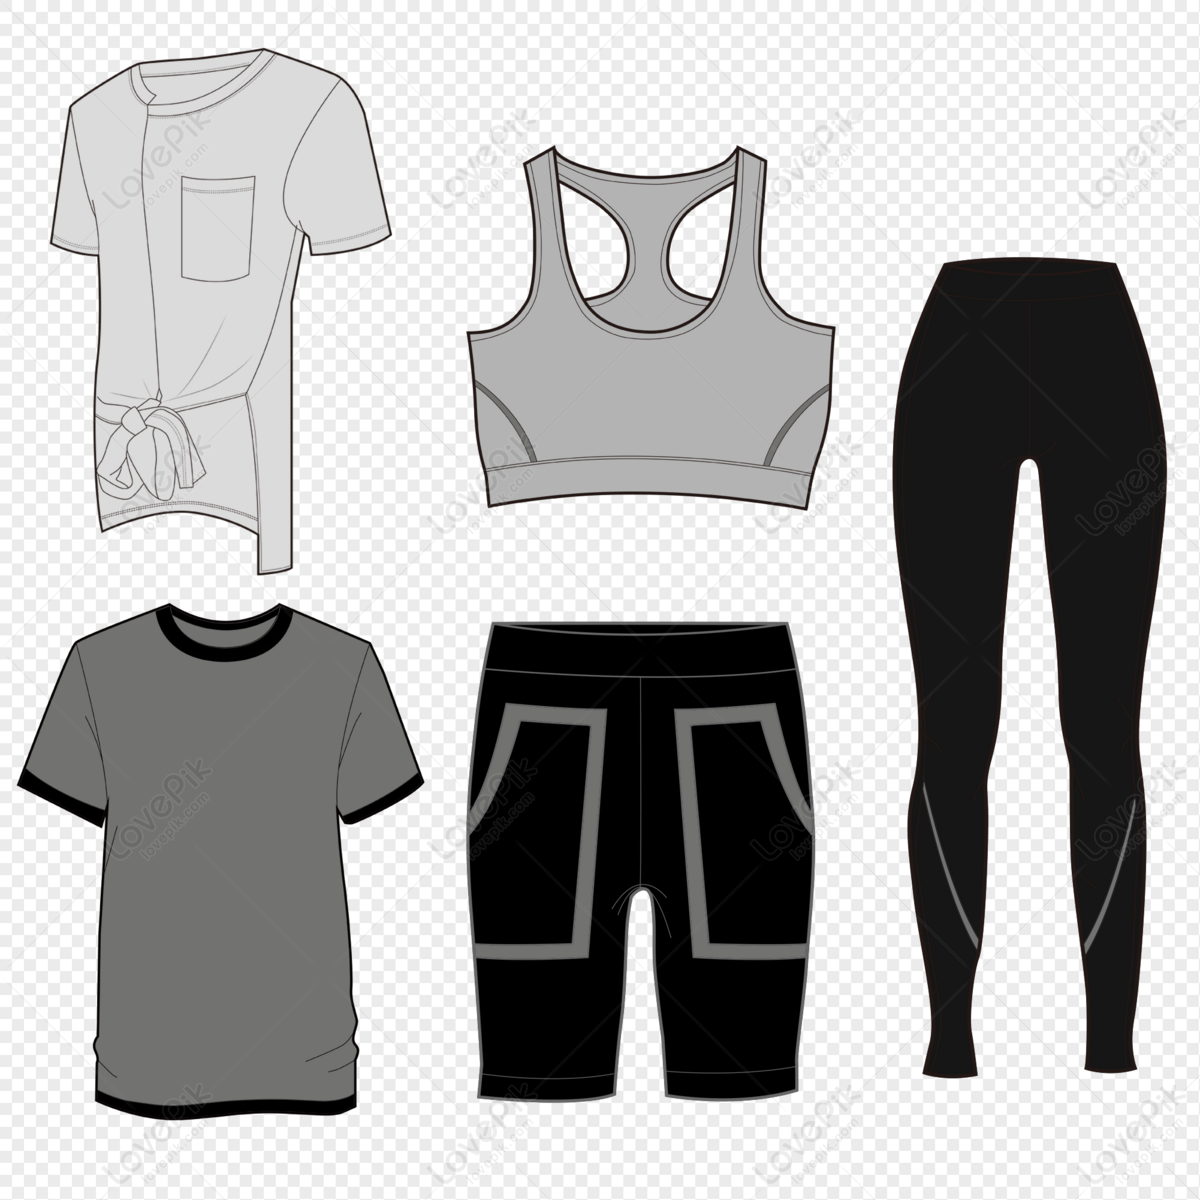 https://img.lovepik.com/free-png/20211127/lovepik-black-and-white-simple-sportswear-png-image_401182974_wh1200.png